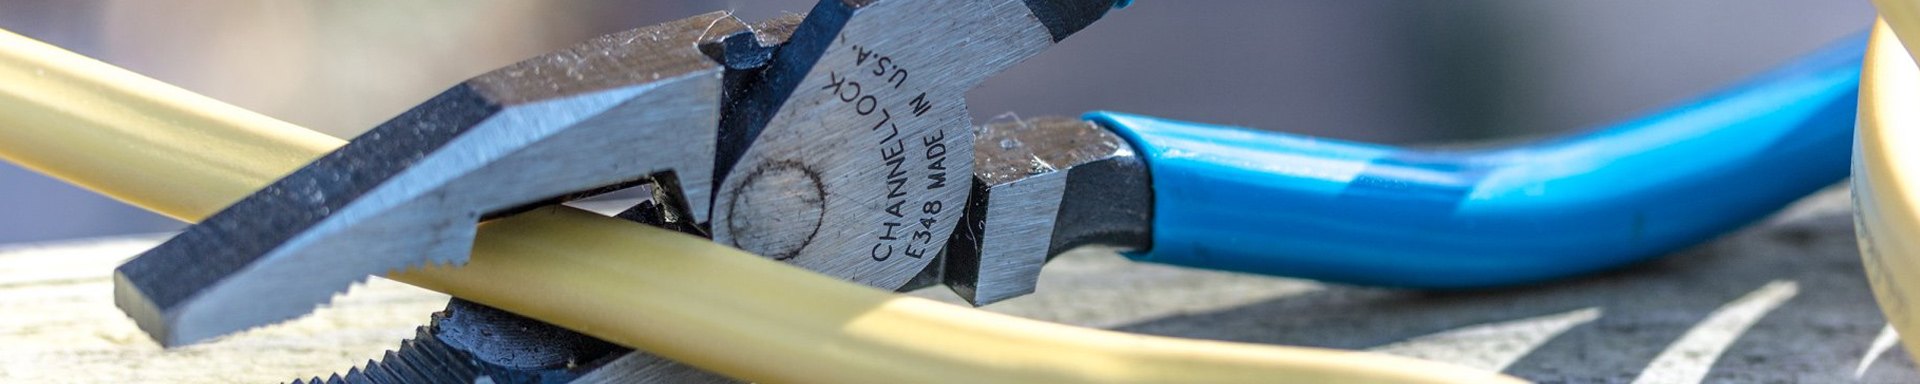 Channellock Ironworker Tools